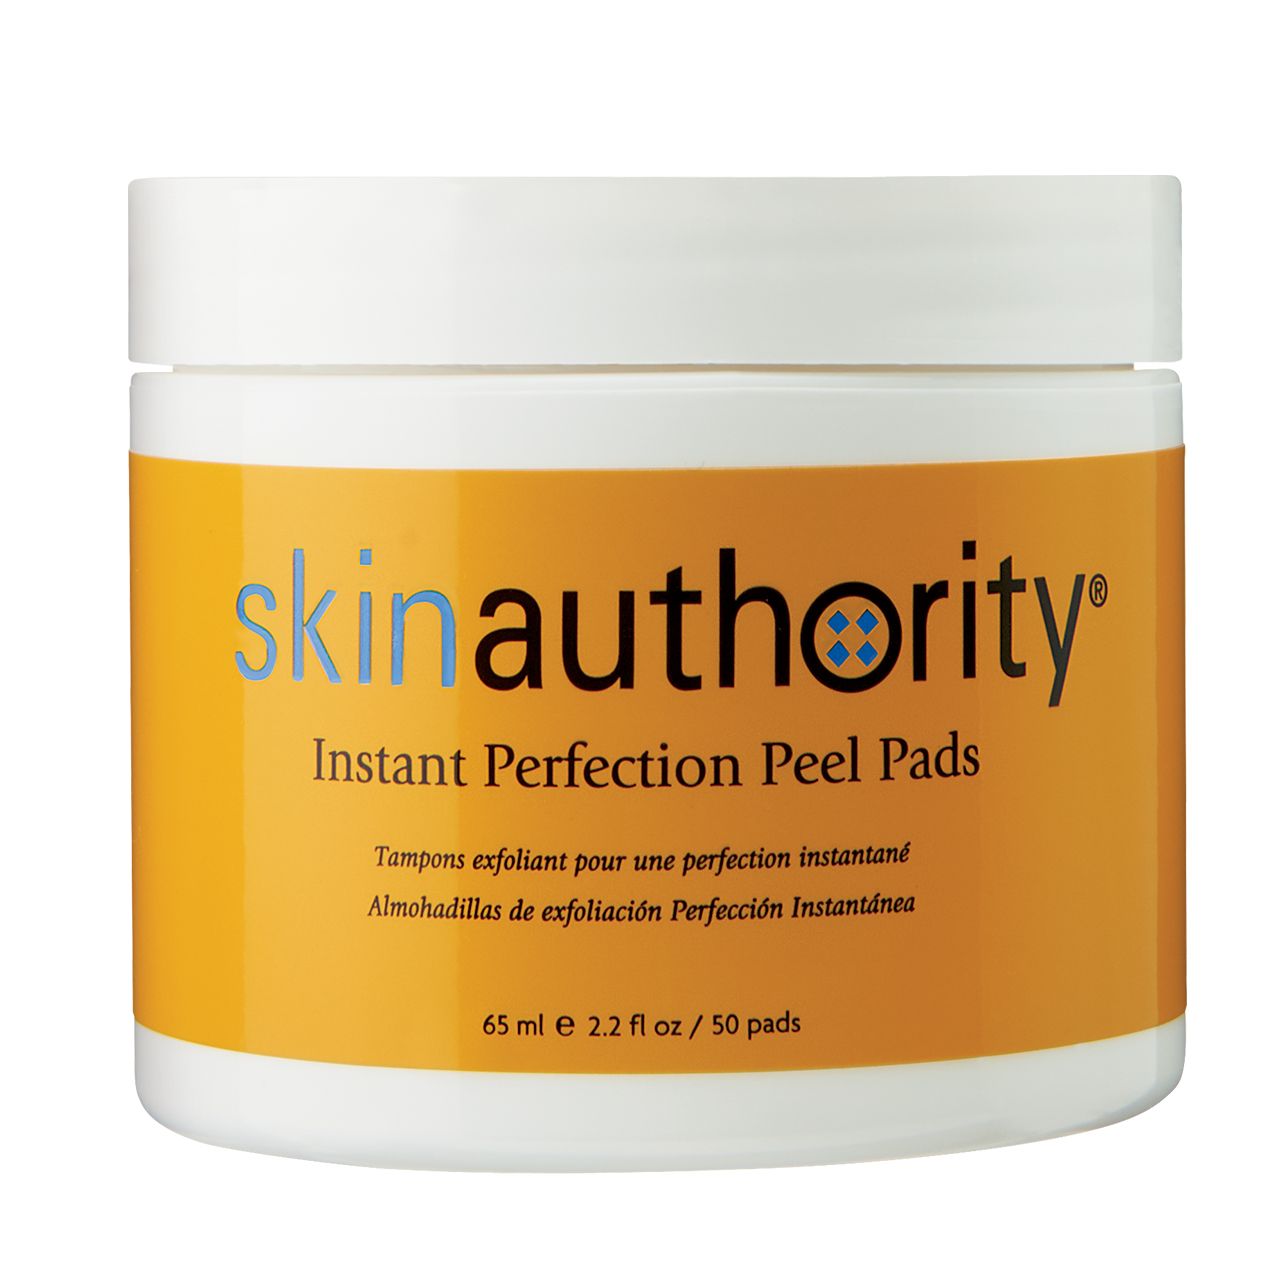 Instant Perfection Peel Pads | Skin Authority